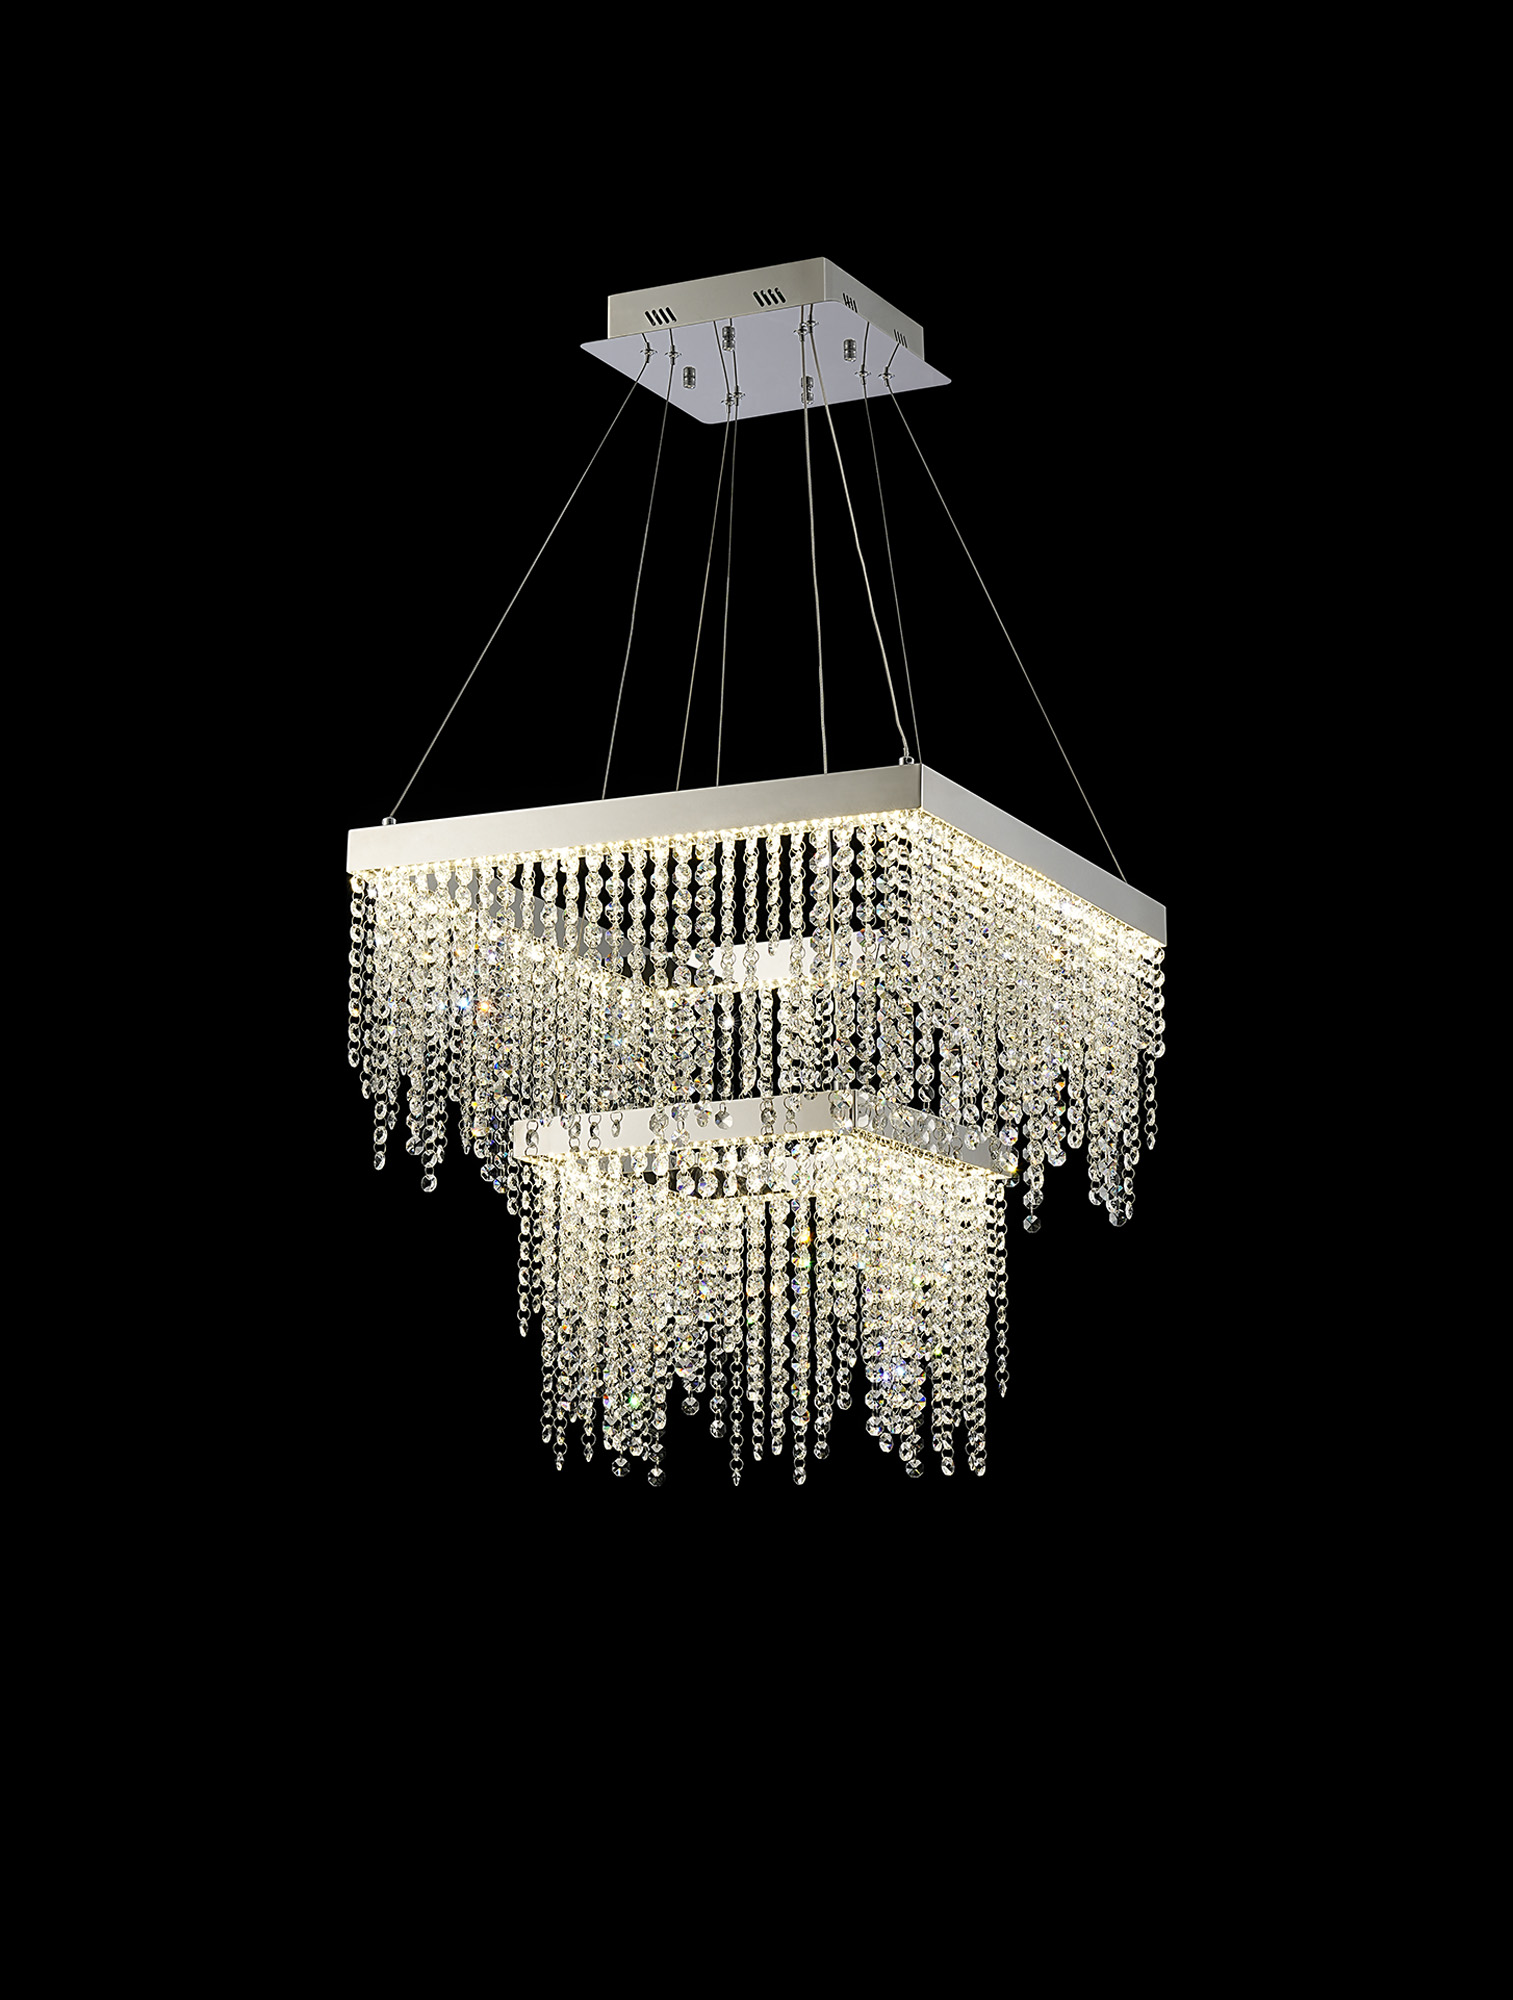 IL32863  Bano Square Dimmable 2 Tier Pendant 47W LED Polished Chrome